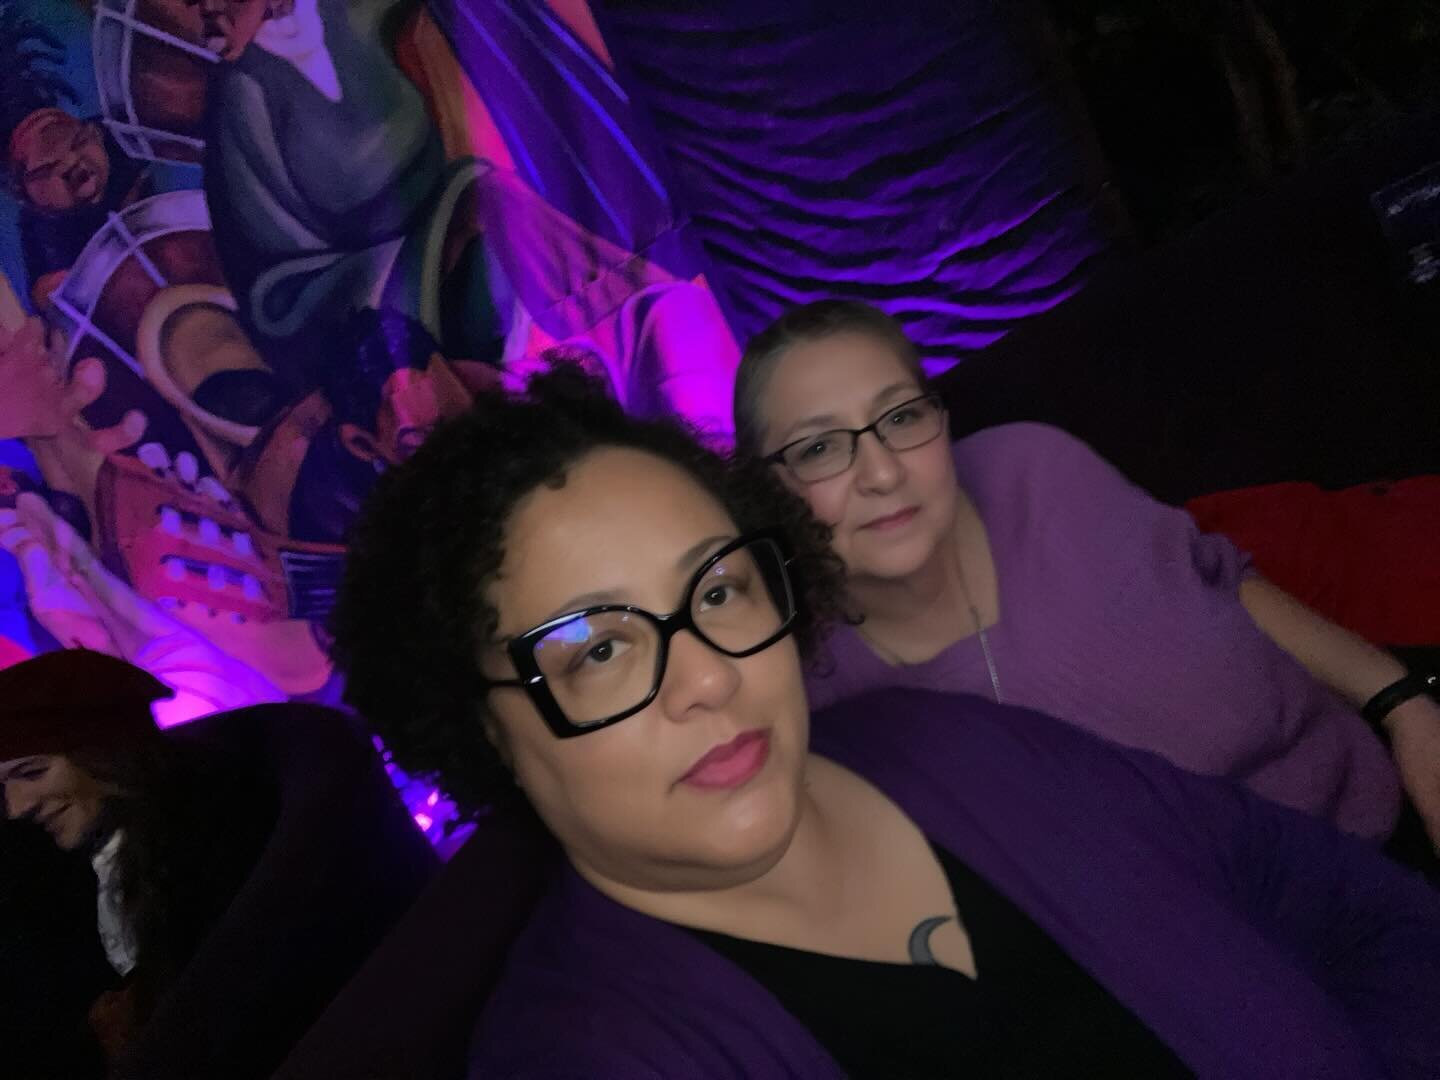 Had a funky good time at @officialpaisleypark today for 7 At The Park. Great music and vibez 💜 We totally forgot to get pics of the Purple Rain pancakes tho ☔️🥞 #paisleypark #prince4ever #mpls #purplearmy #prince